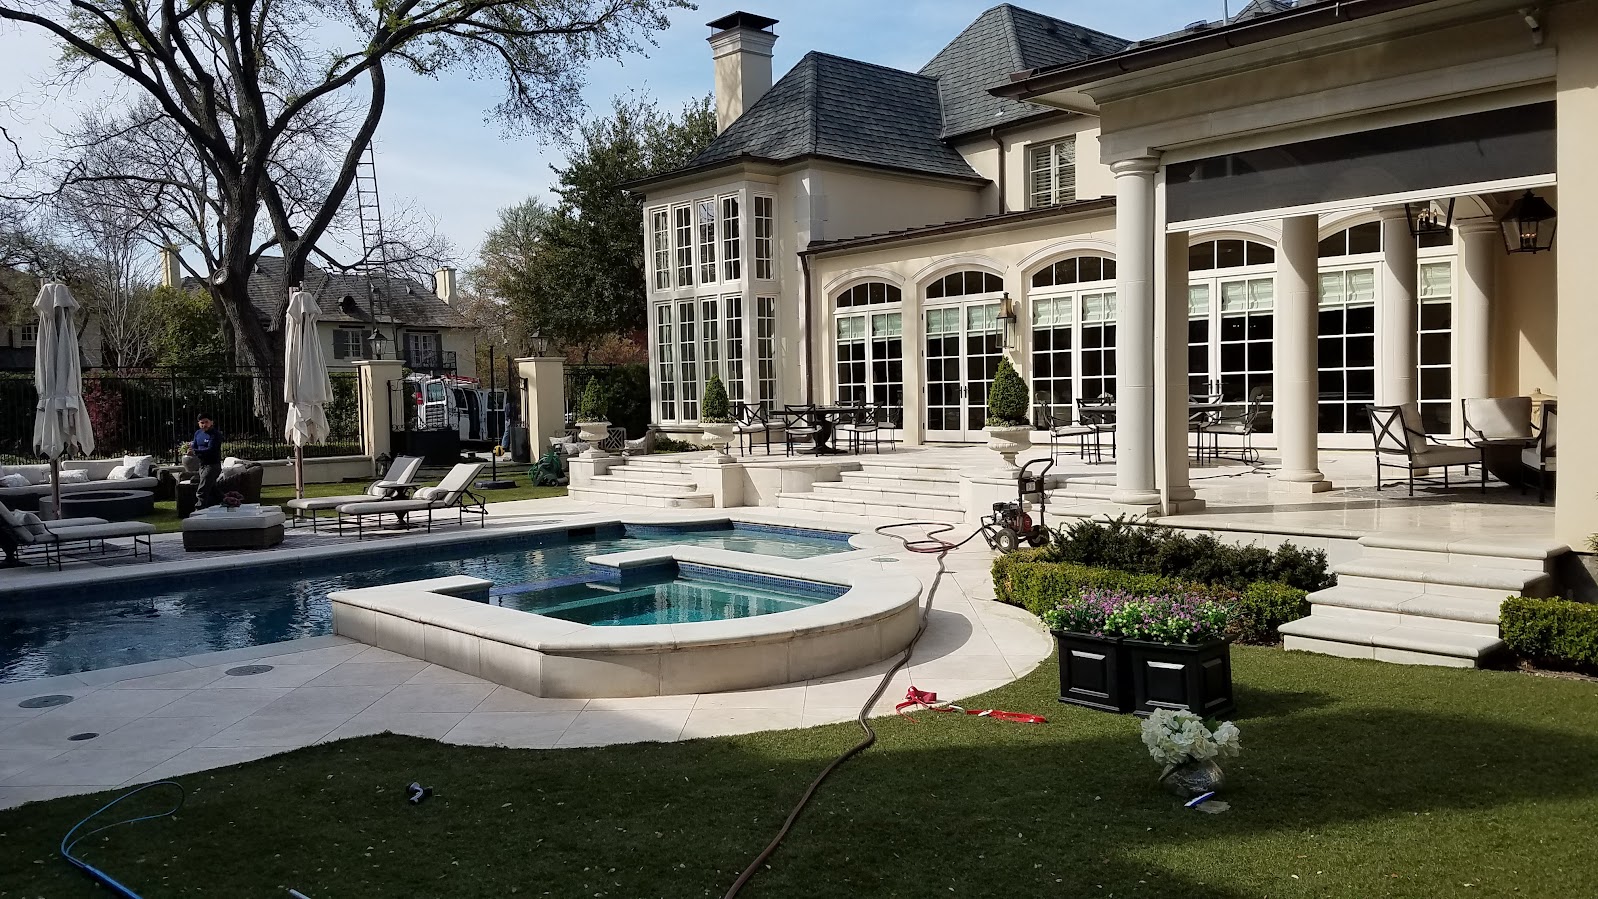 Power washing entire house including pool deck back yard area in highland park dallas texas, by house painting triforce